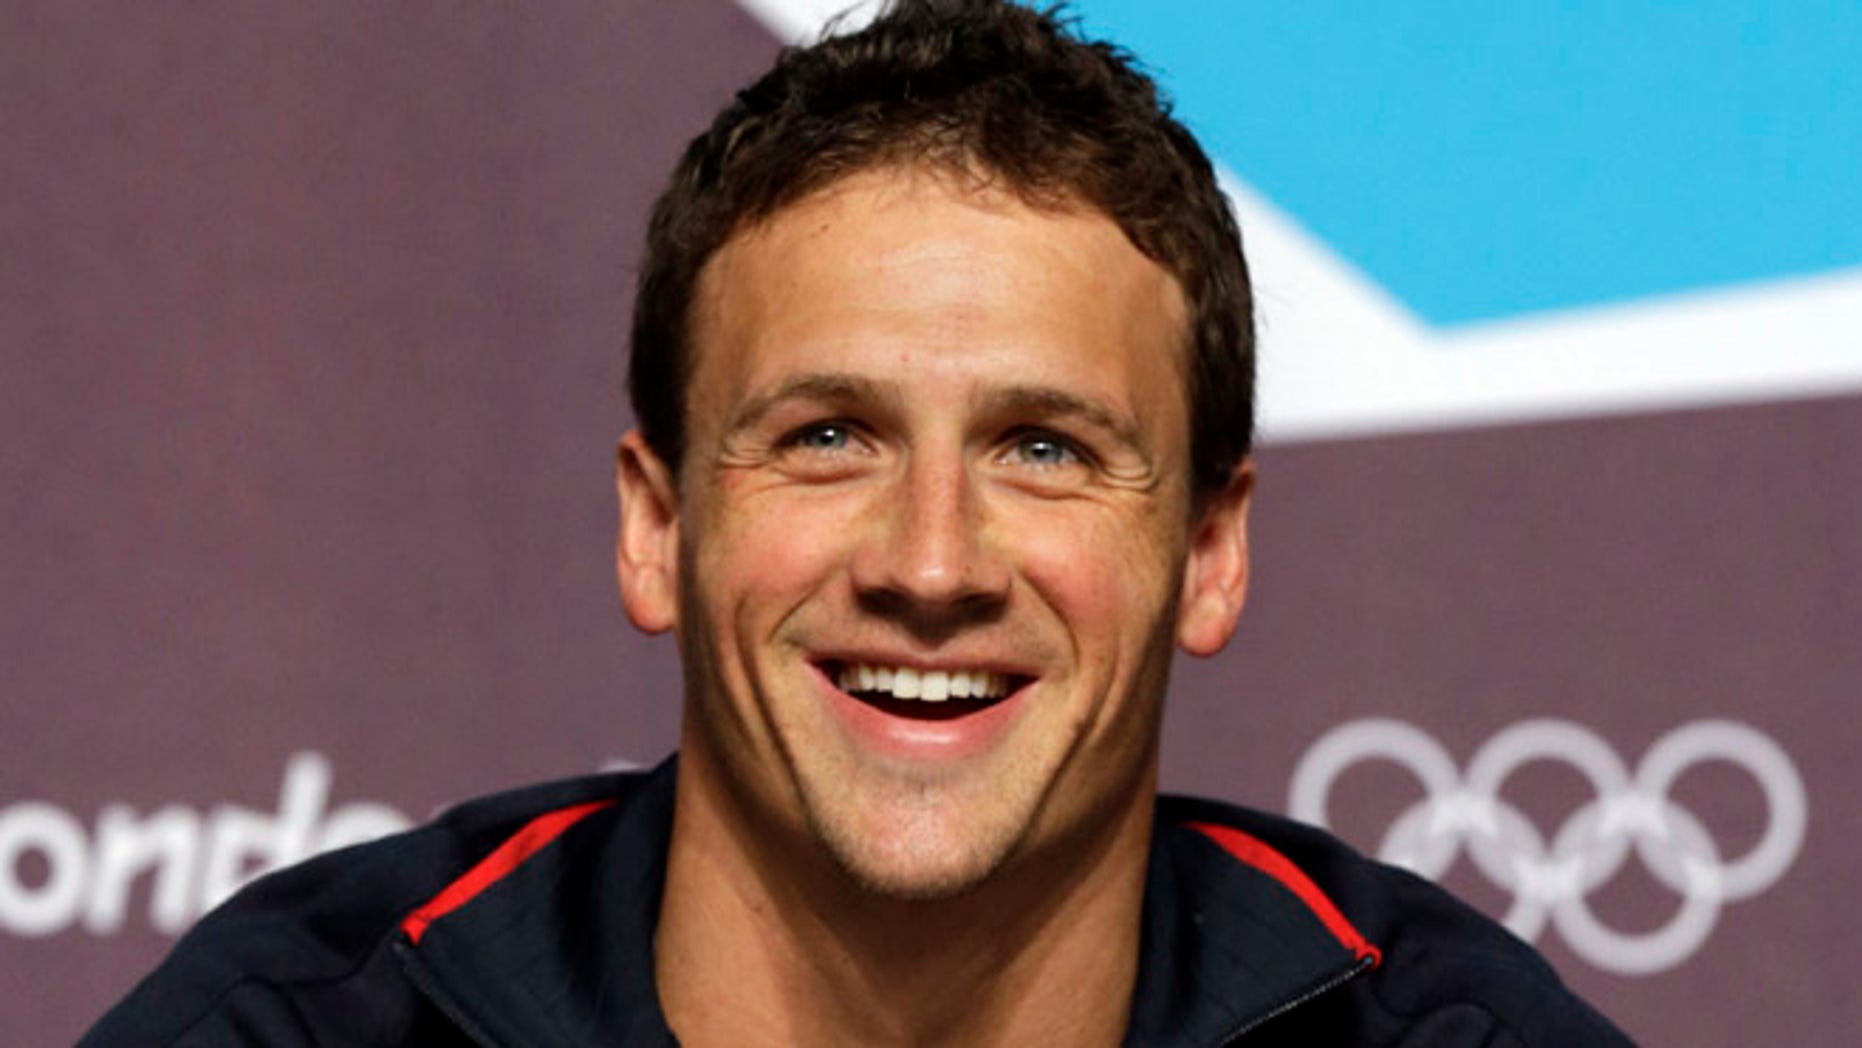 Ryan Lochte would seek treatment for alcohol addiction, said Olympian Lawyer Jeff Ostrow at TMZ.